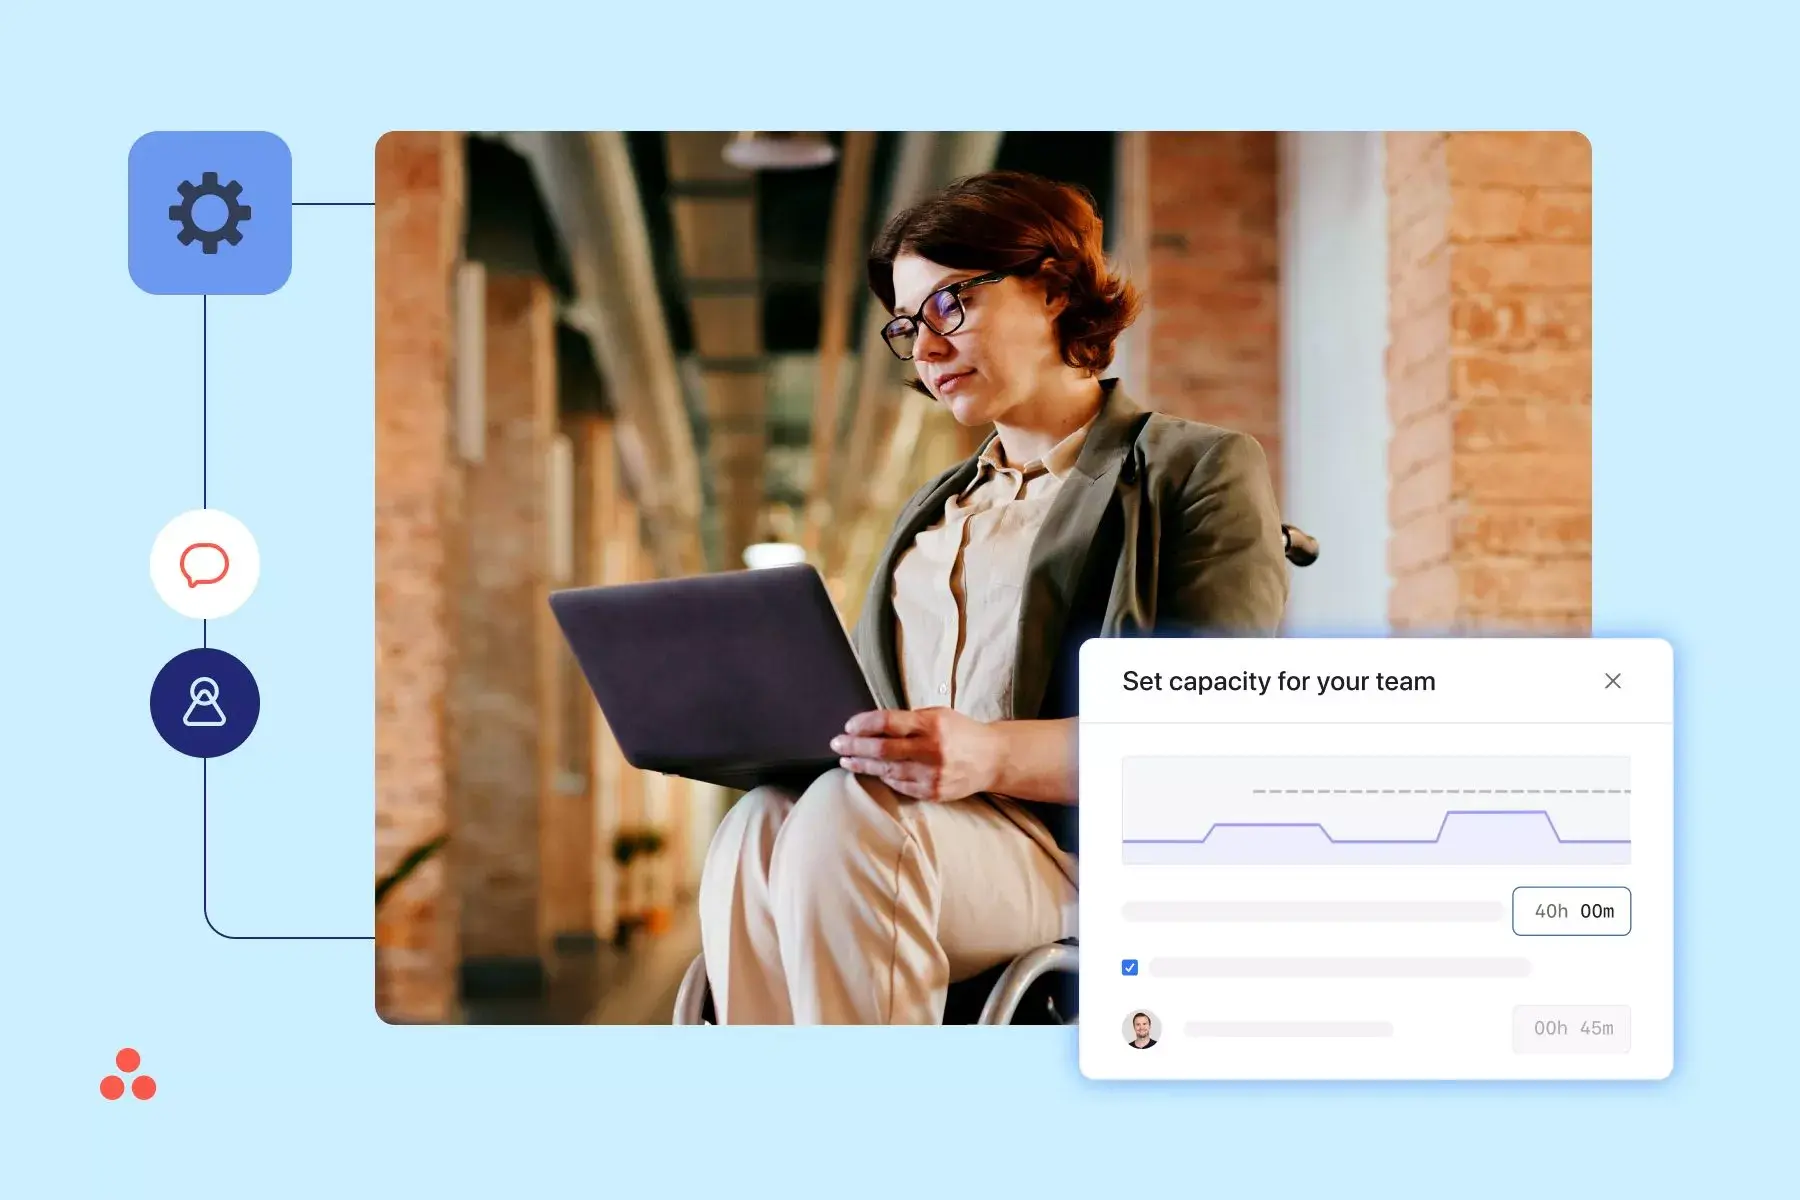 Banner image for an article on resource management for enterprise organizations. Shows a photograph of a woman in an office environment and illustrations representing data and communications.